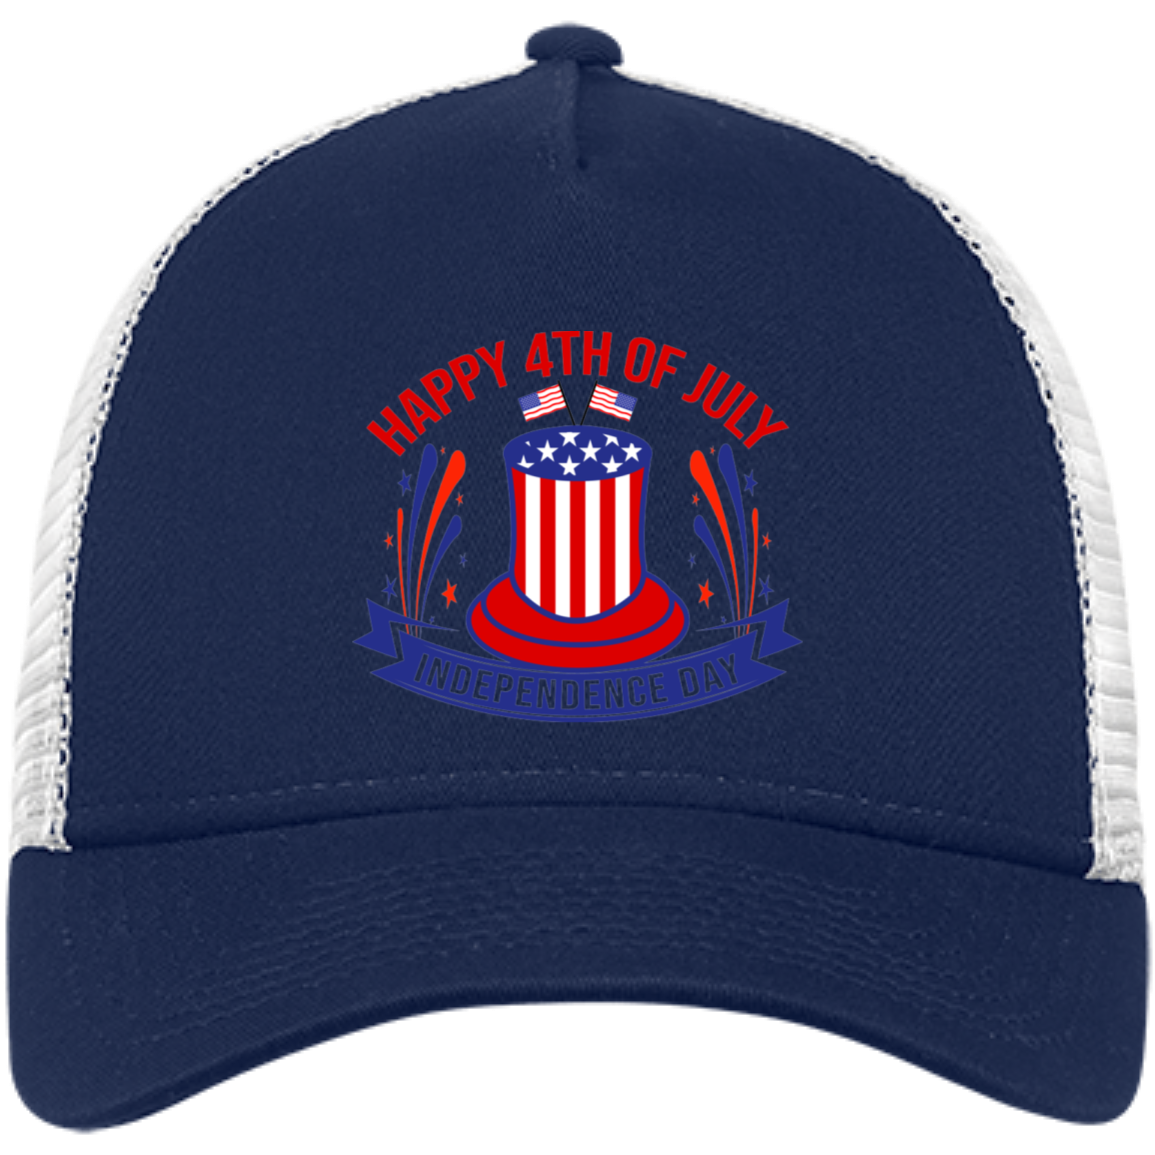 HAPPY 4TH OF JULY POP HAT Embroidered Snapback Trucker Cap